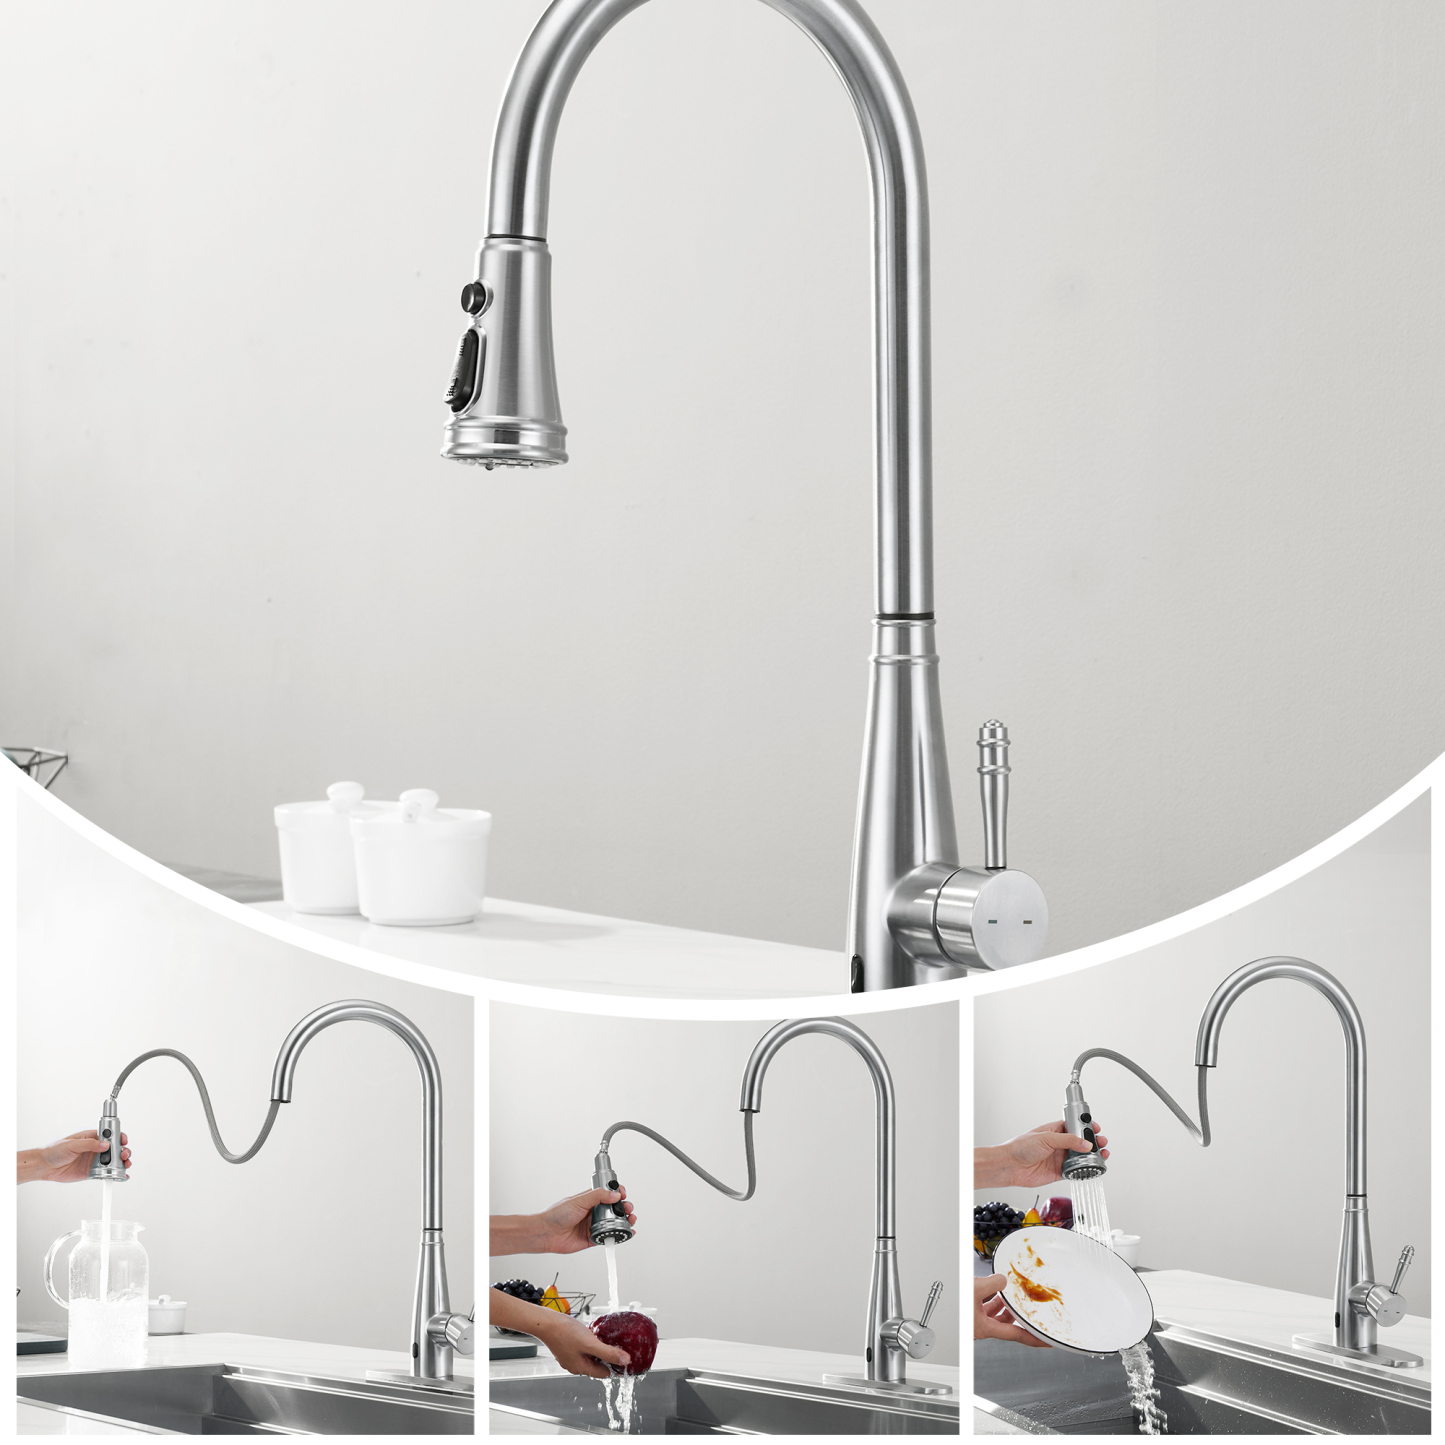 CF-15029 Touch And Infrared Sensing Faucet With Pull-down Sprayer-Arrisea